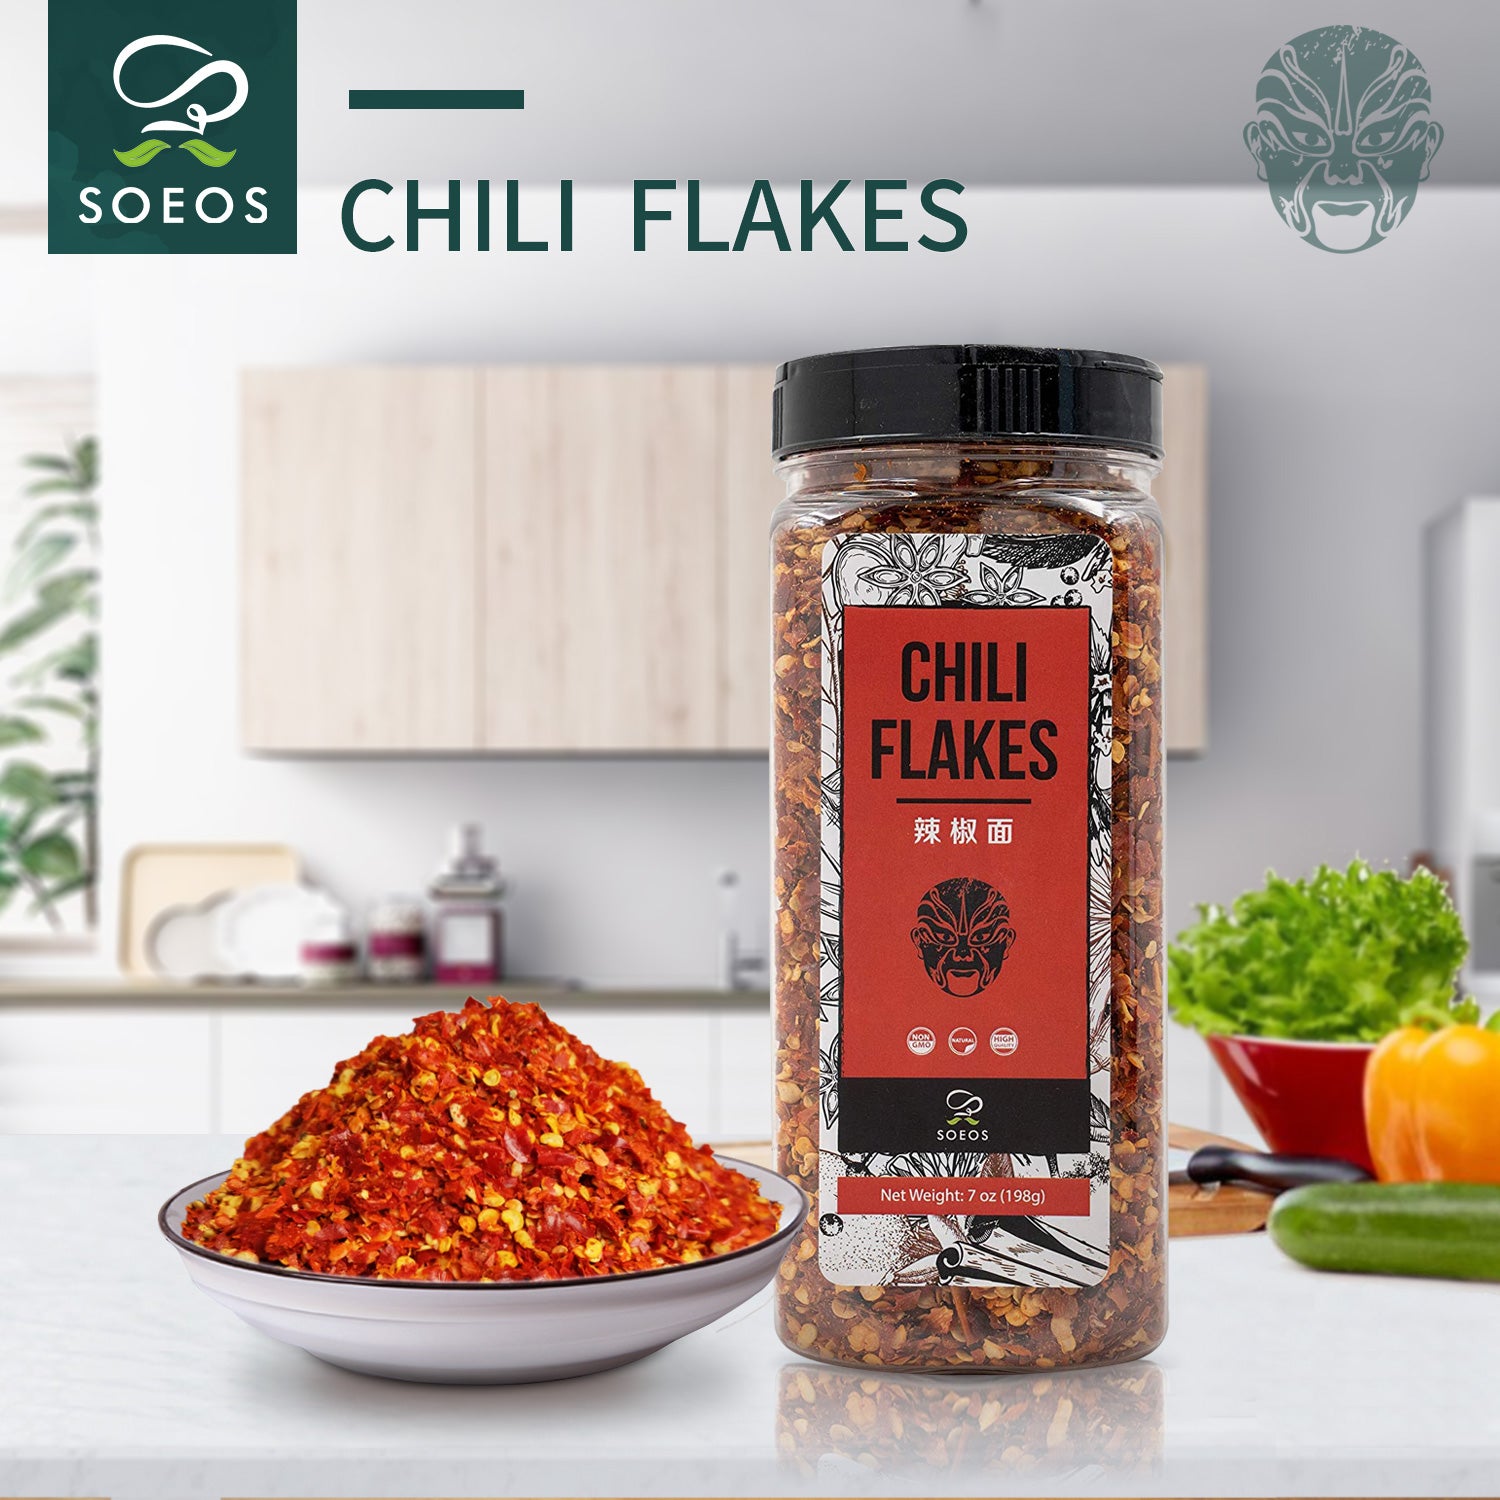 A dish of chili flakes is next to a Soeos Chili Flakes, and the kitchen is in the background. 